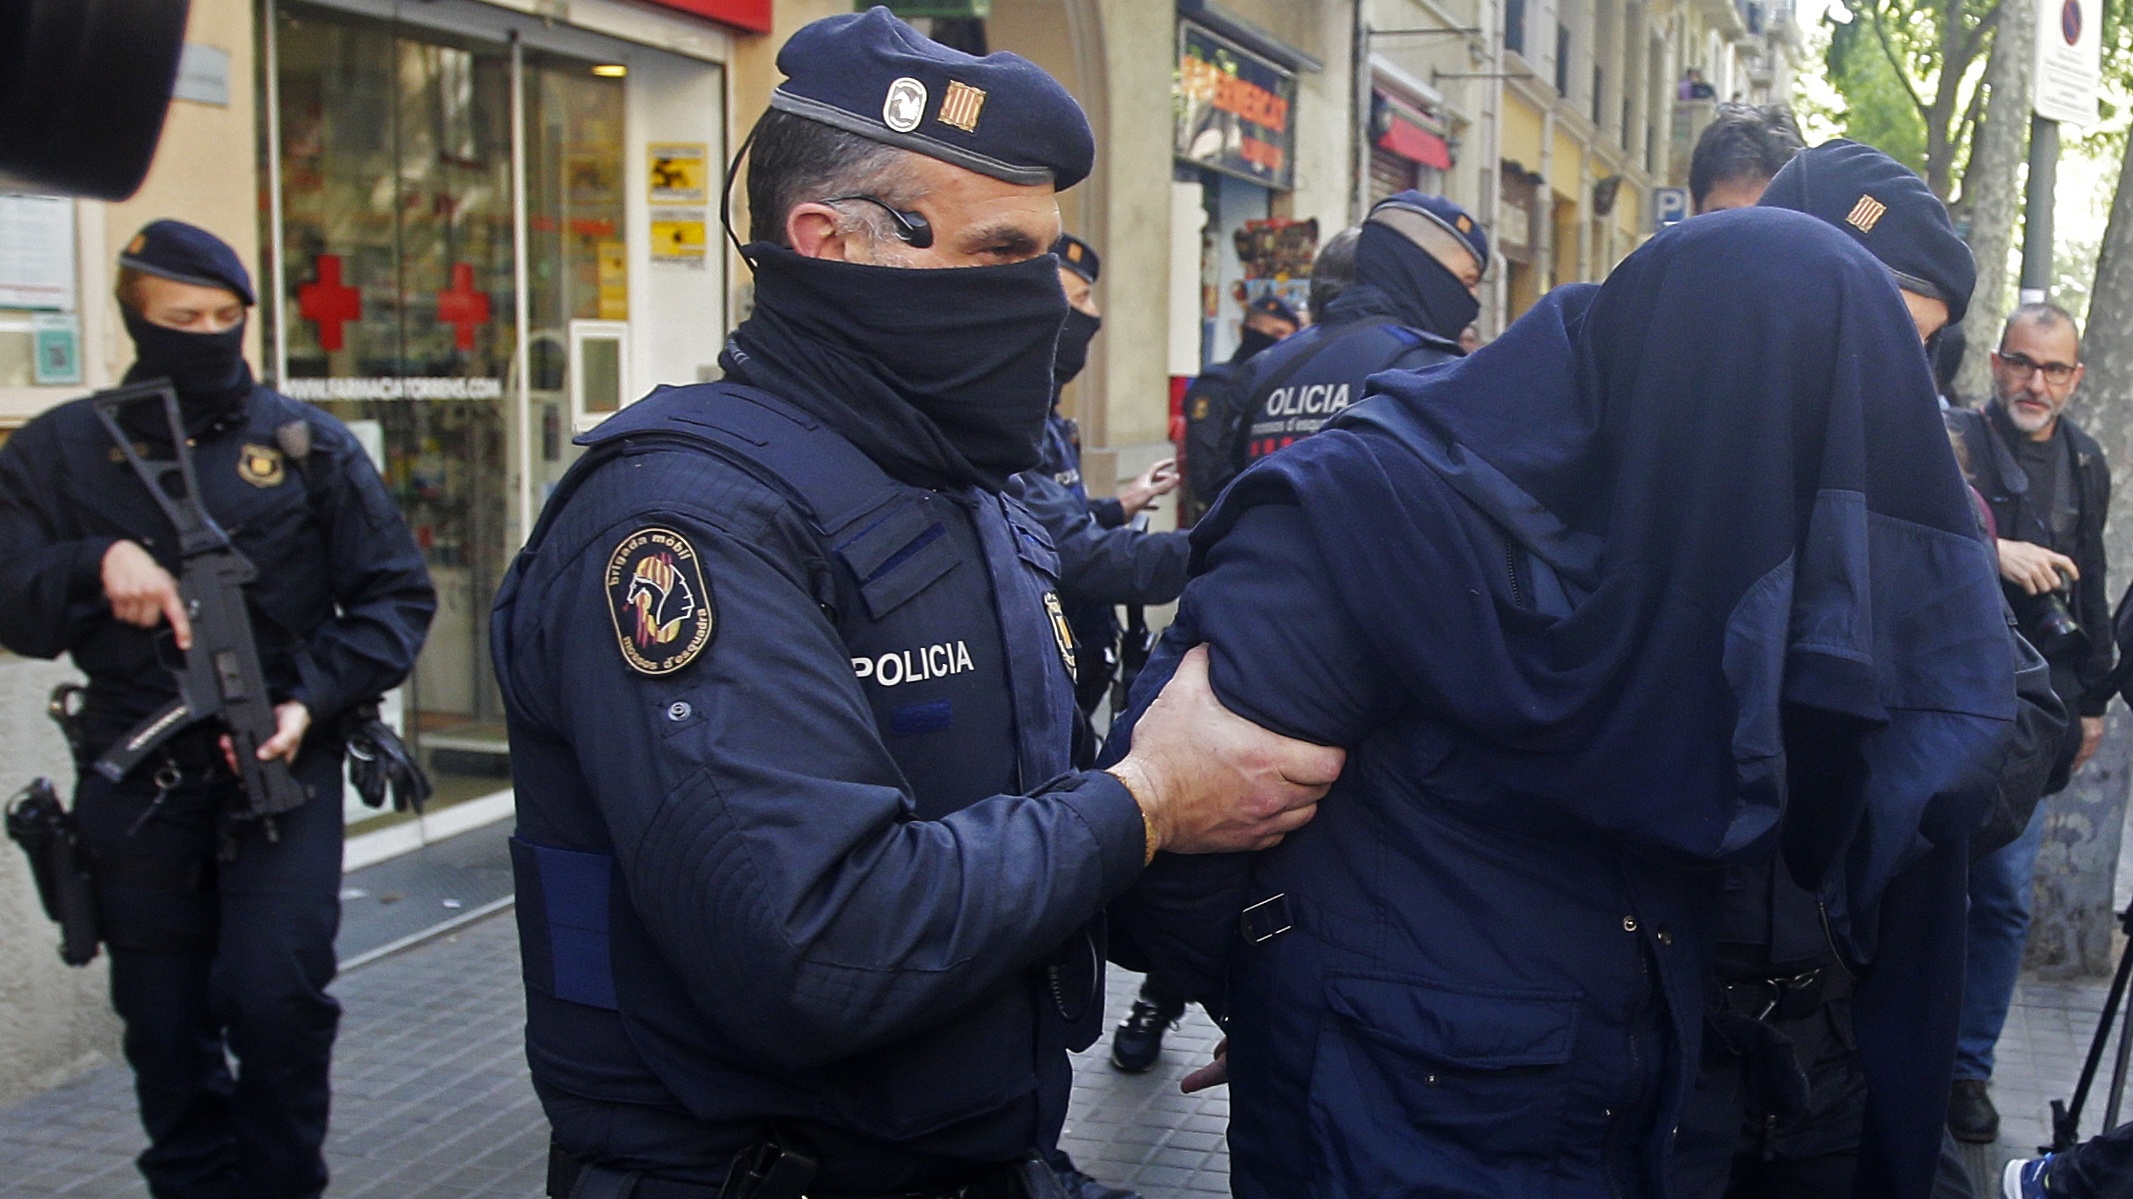 Alleged ISIS member arrested in Spain in collaboration with Morocco